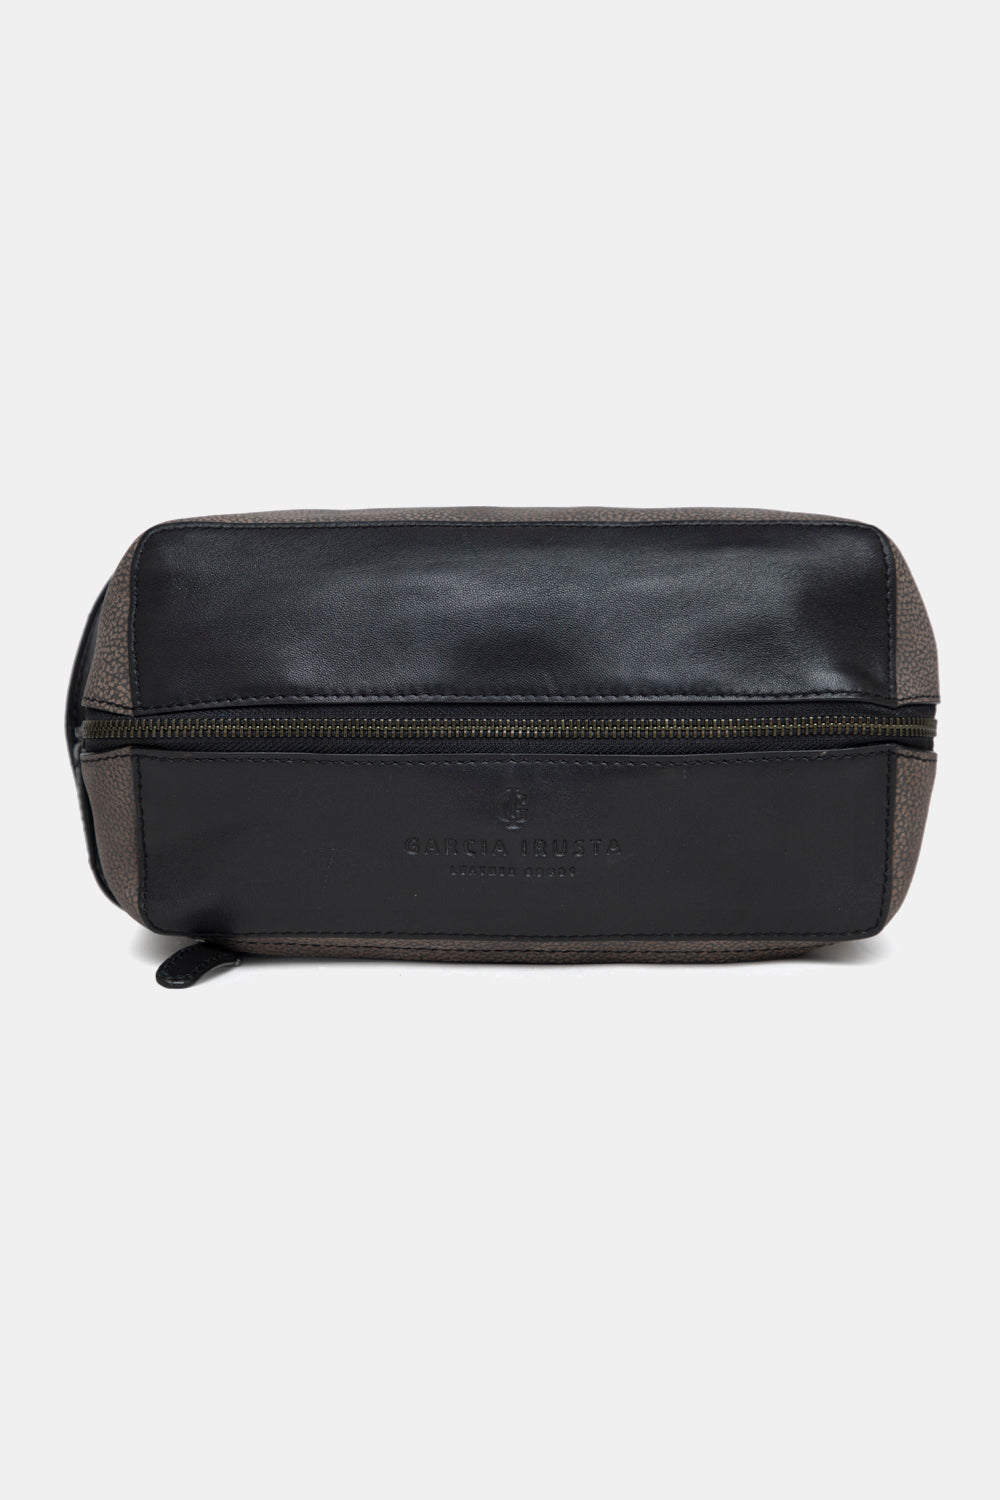 Justanned Black Textured Travel Pouch